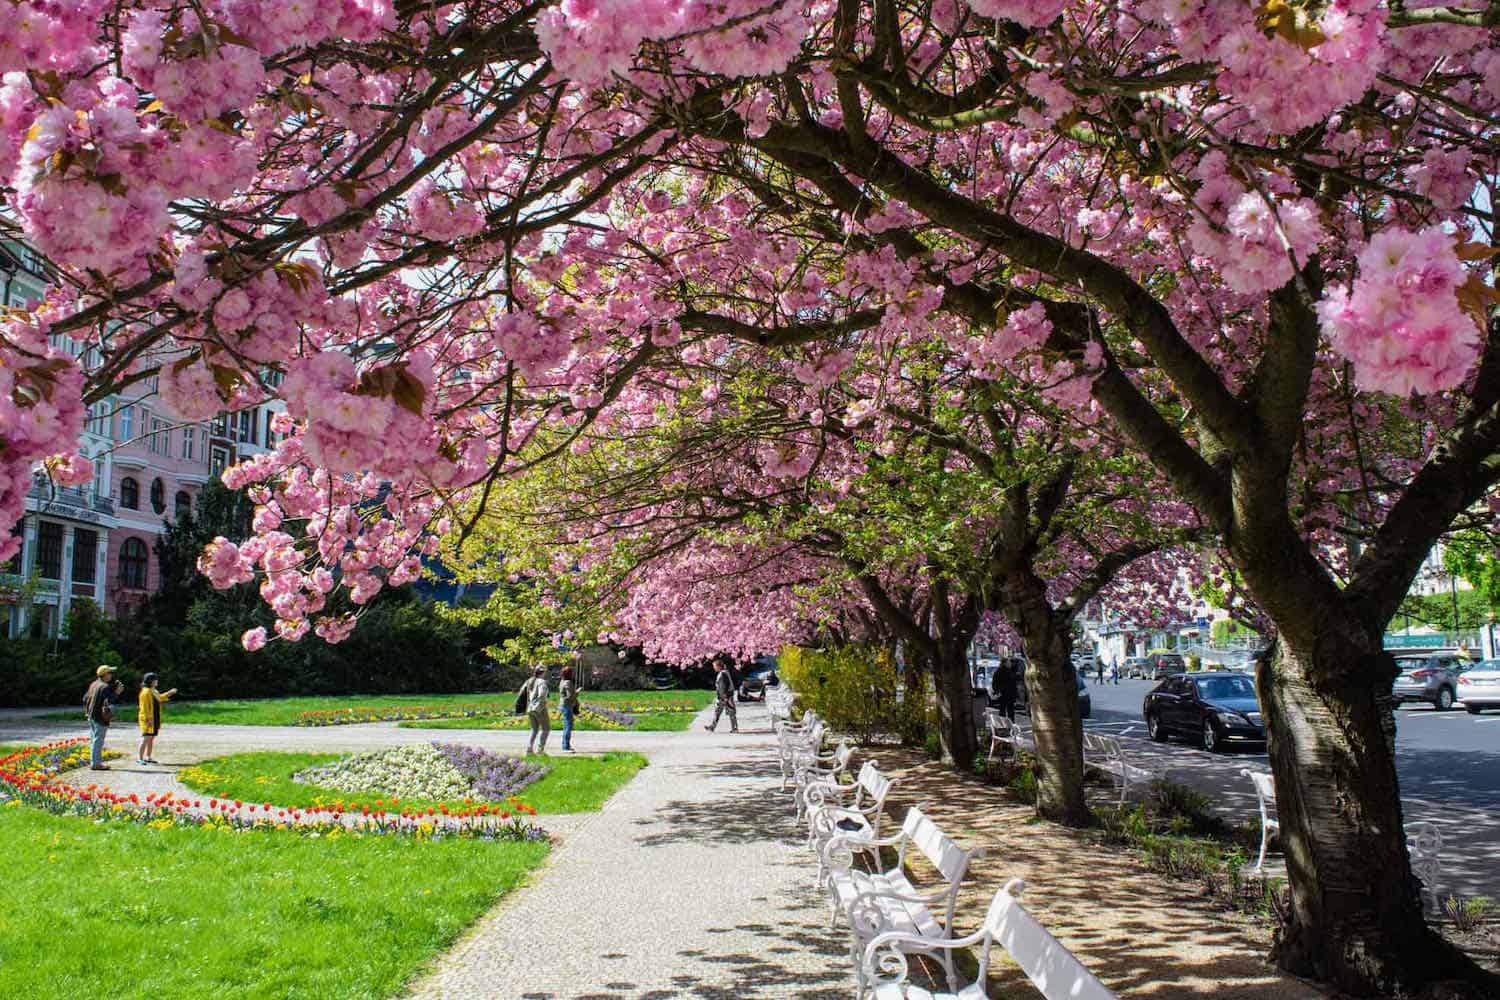 Pink blooming trees overhang a sidewalk and park in Karlovy Vary, Czech Republic.